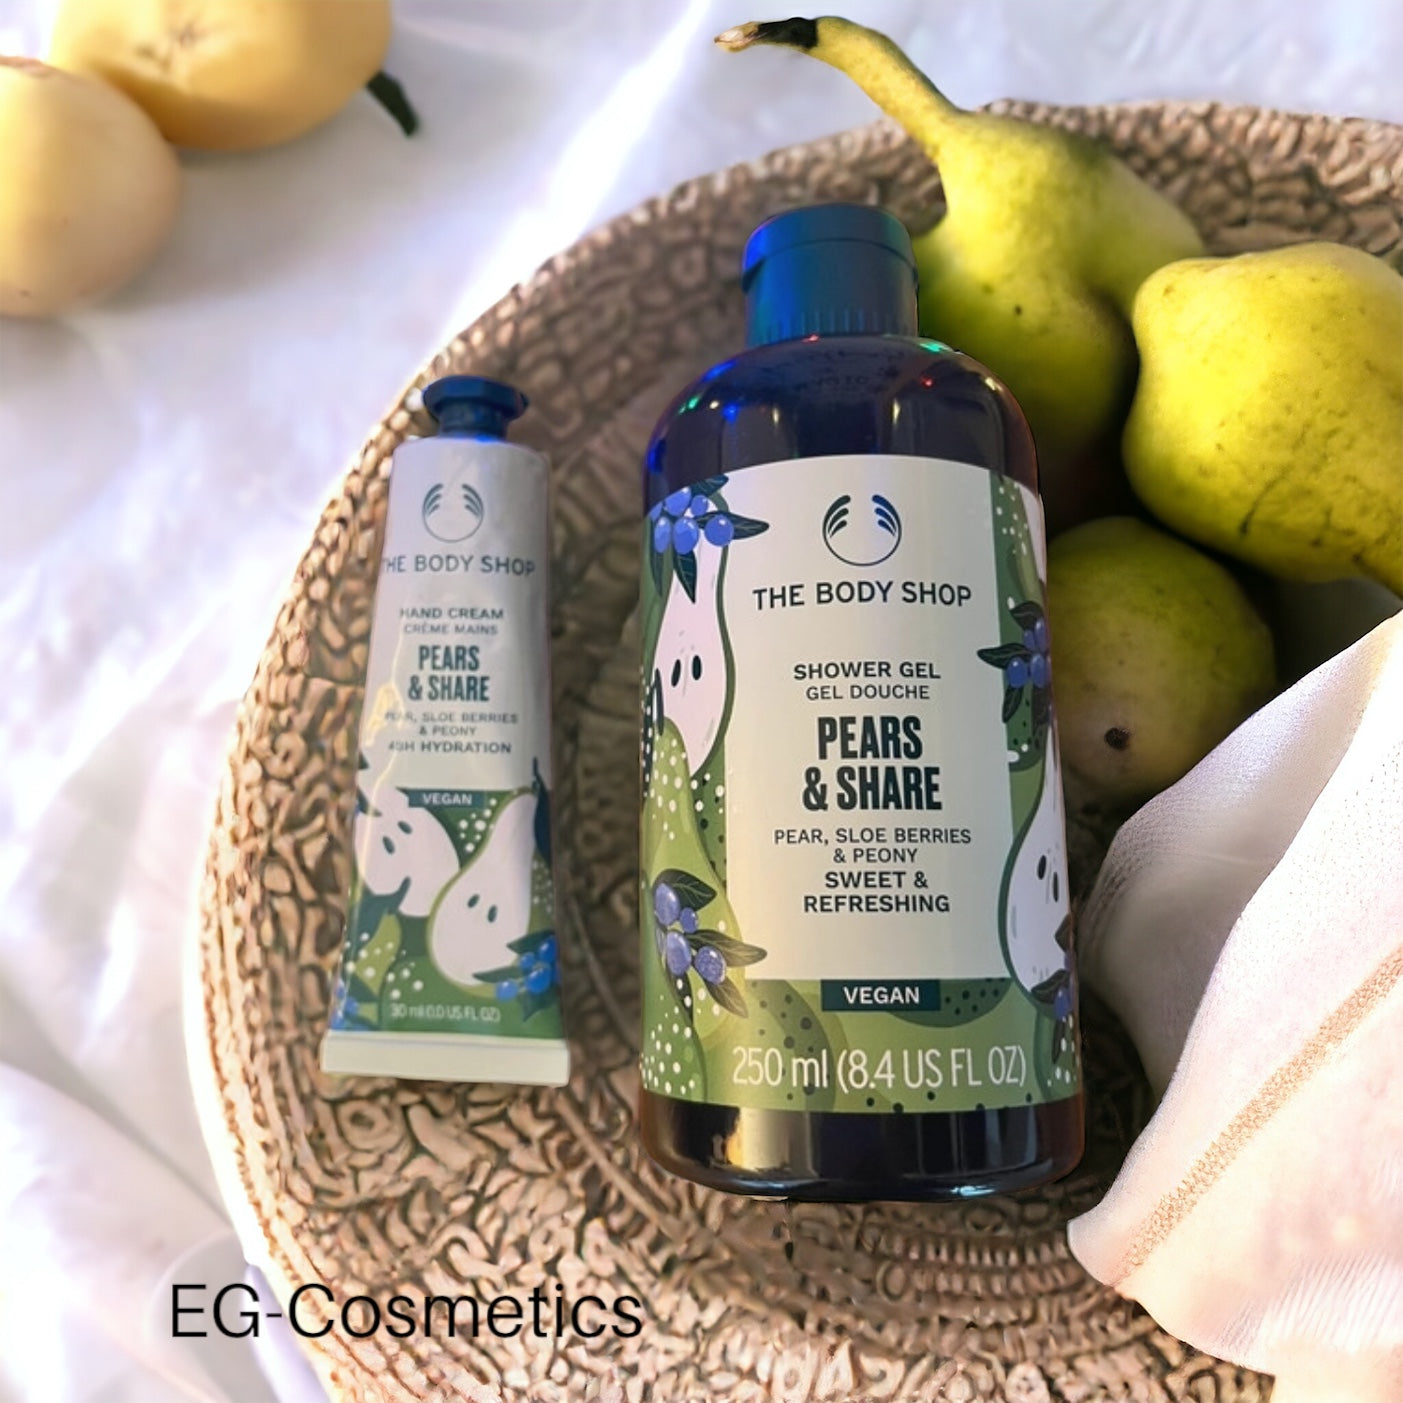 The Body Shop by EG-Cosmetics  'Pears & Shares' Shower Gel & Hand Cream DUO